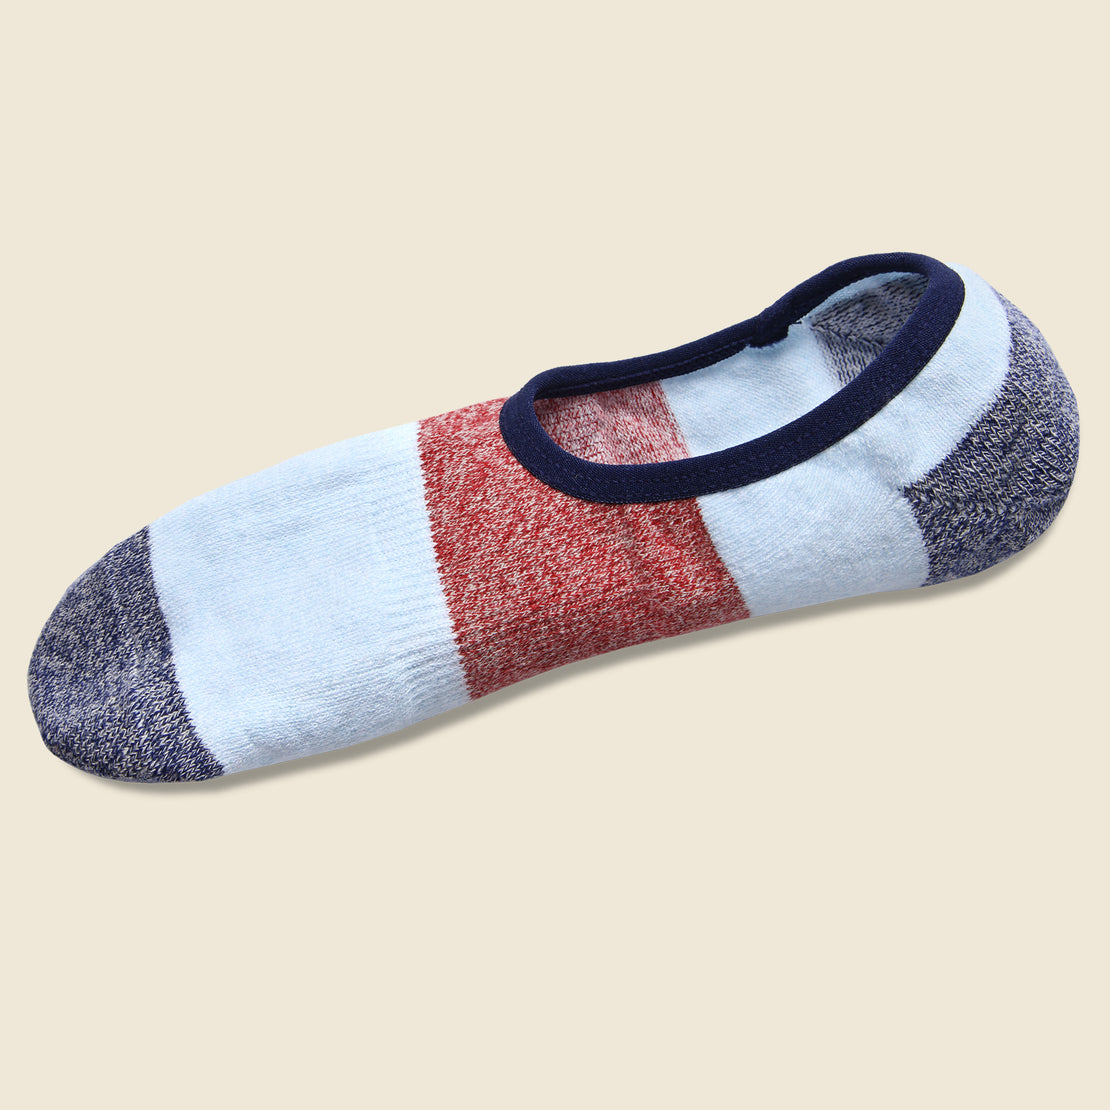 Richer Poorer Chief Everyday No Show Sock - Navy/Red